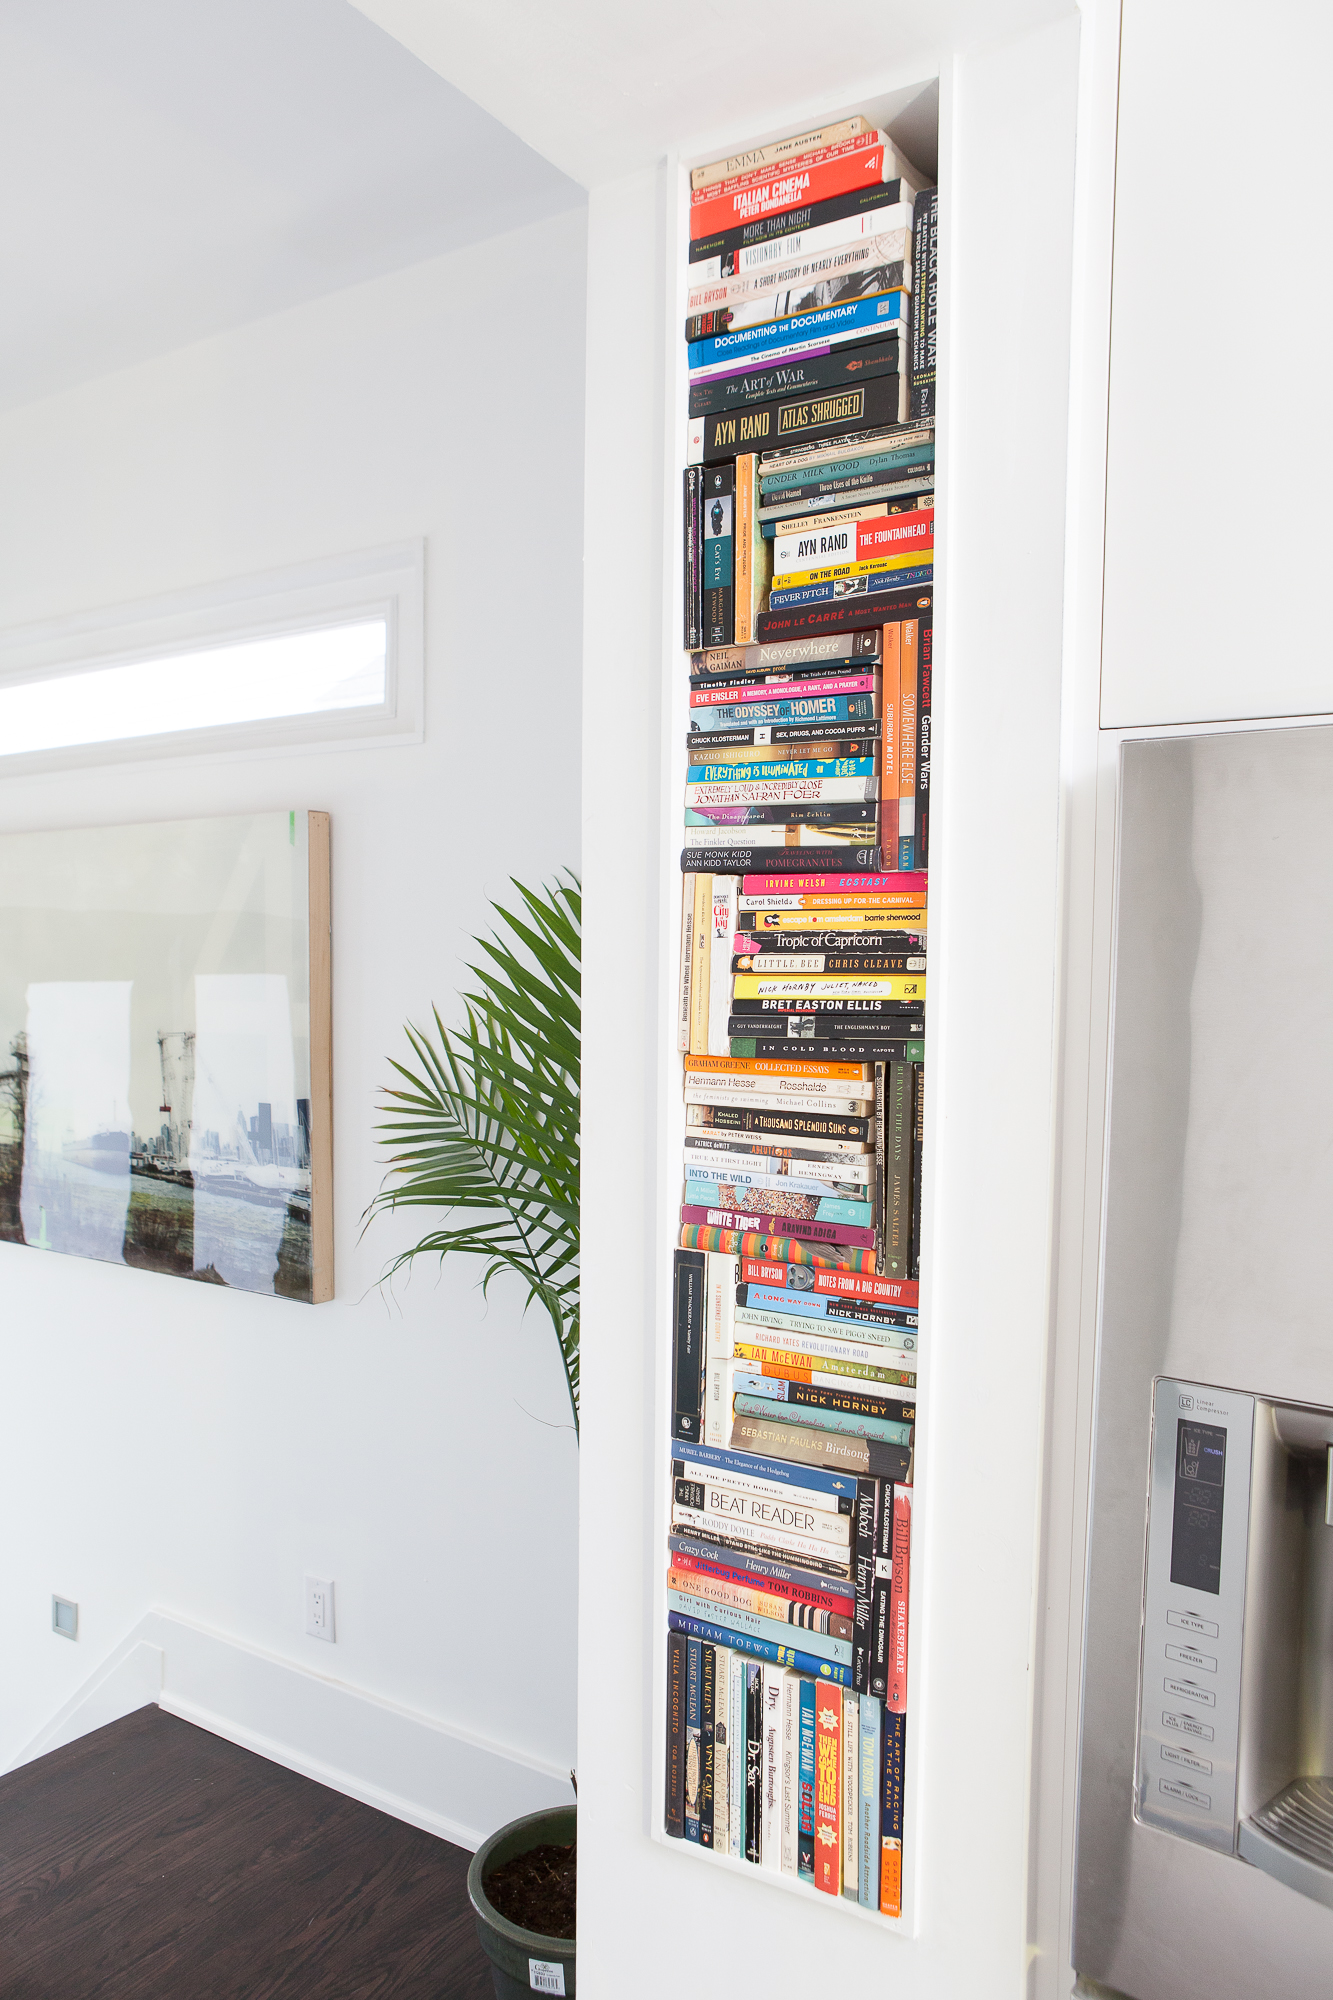 Integrated wall niche in kitchen to display books.